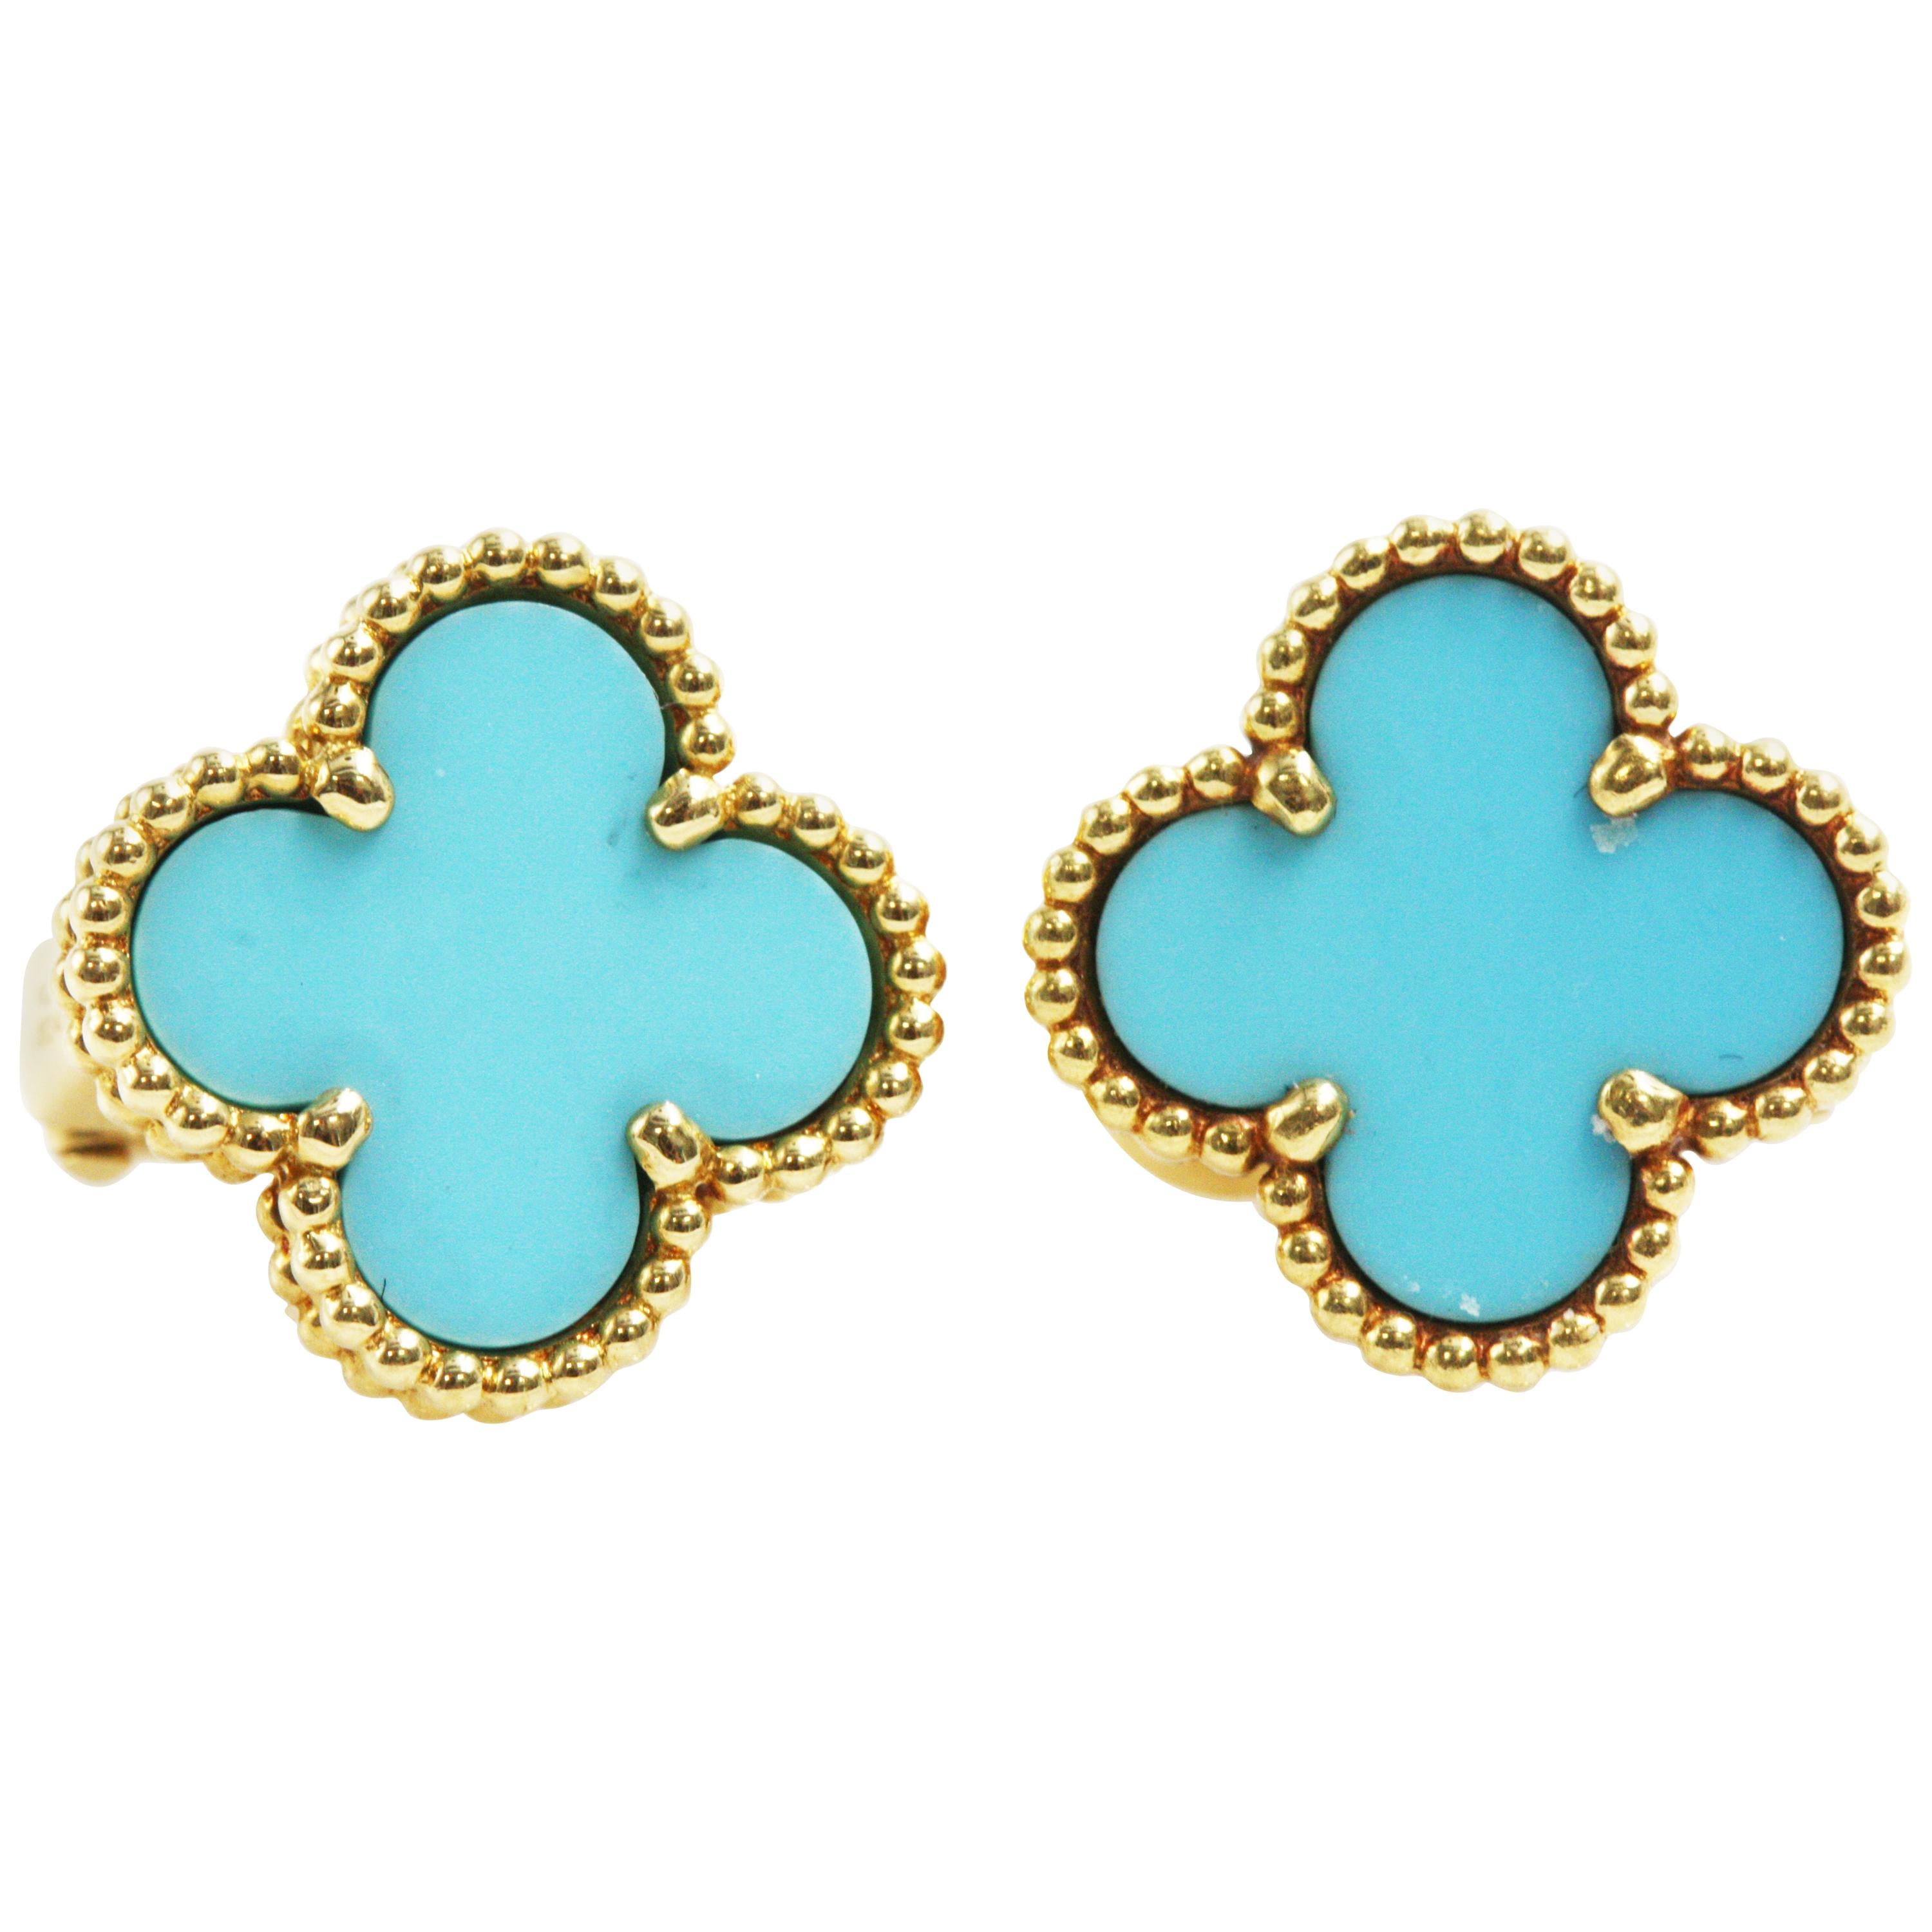 Van Cleef & Arpels Alhambra Earstuds Yellow Gold Turquoise Earrings For Sale